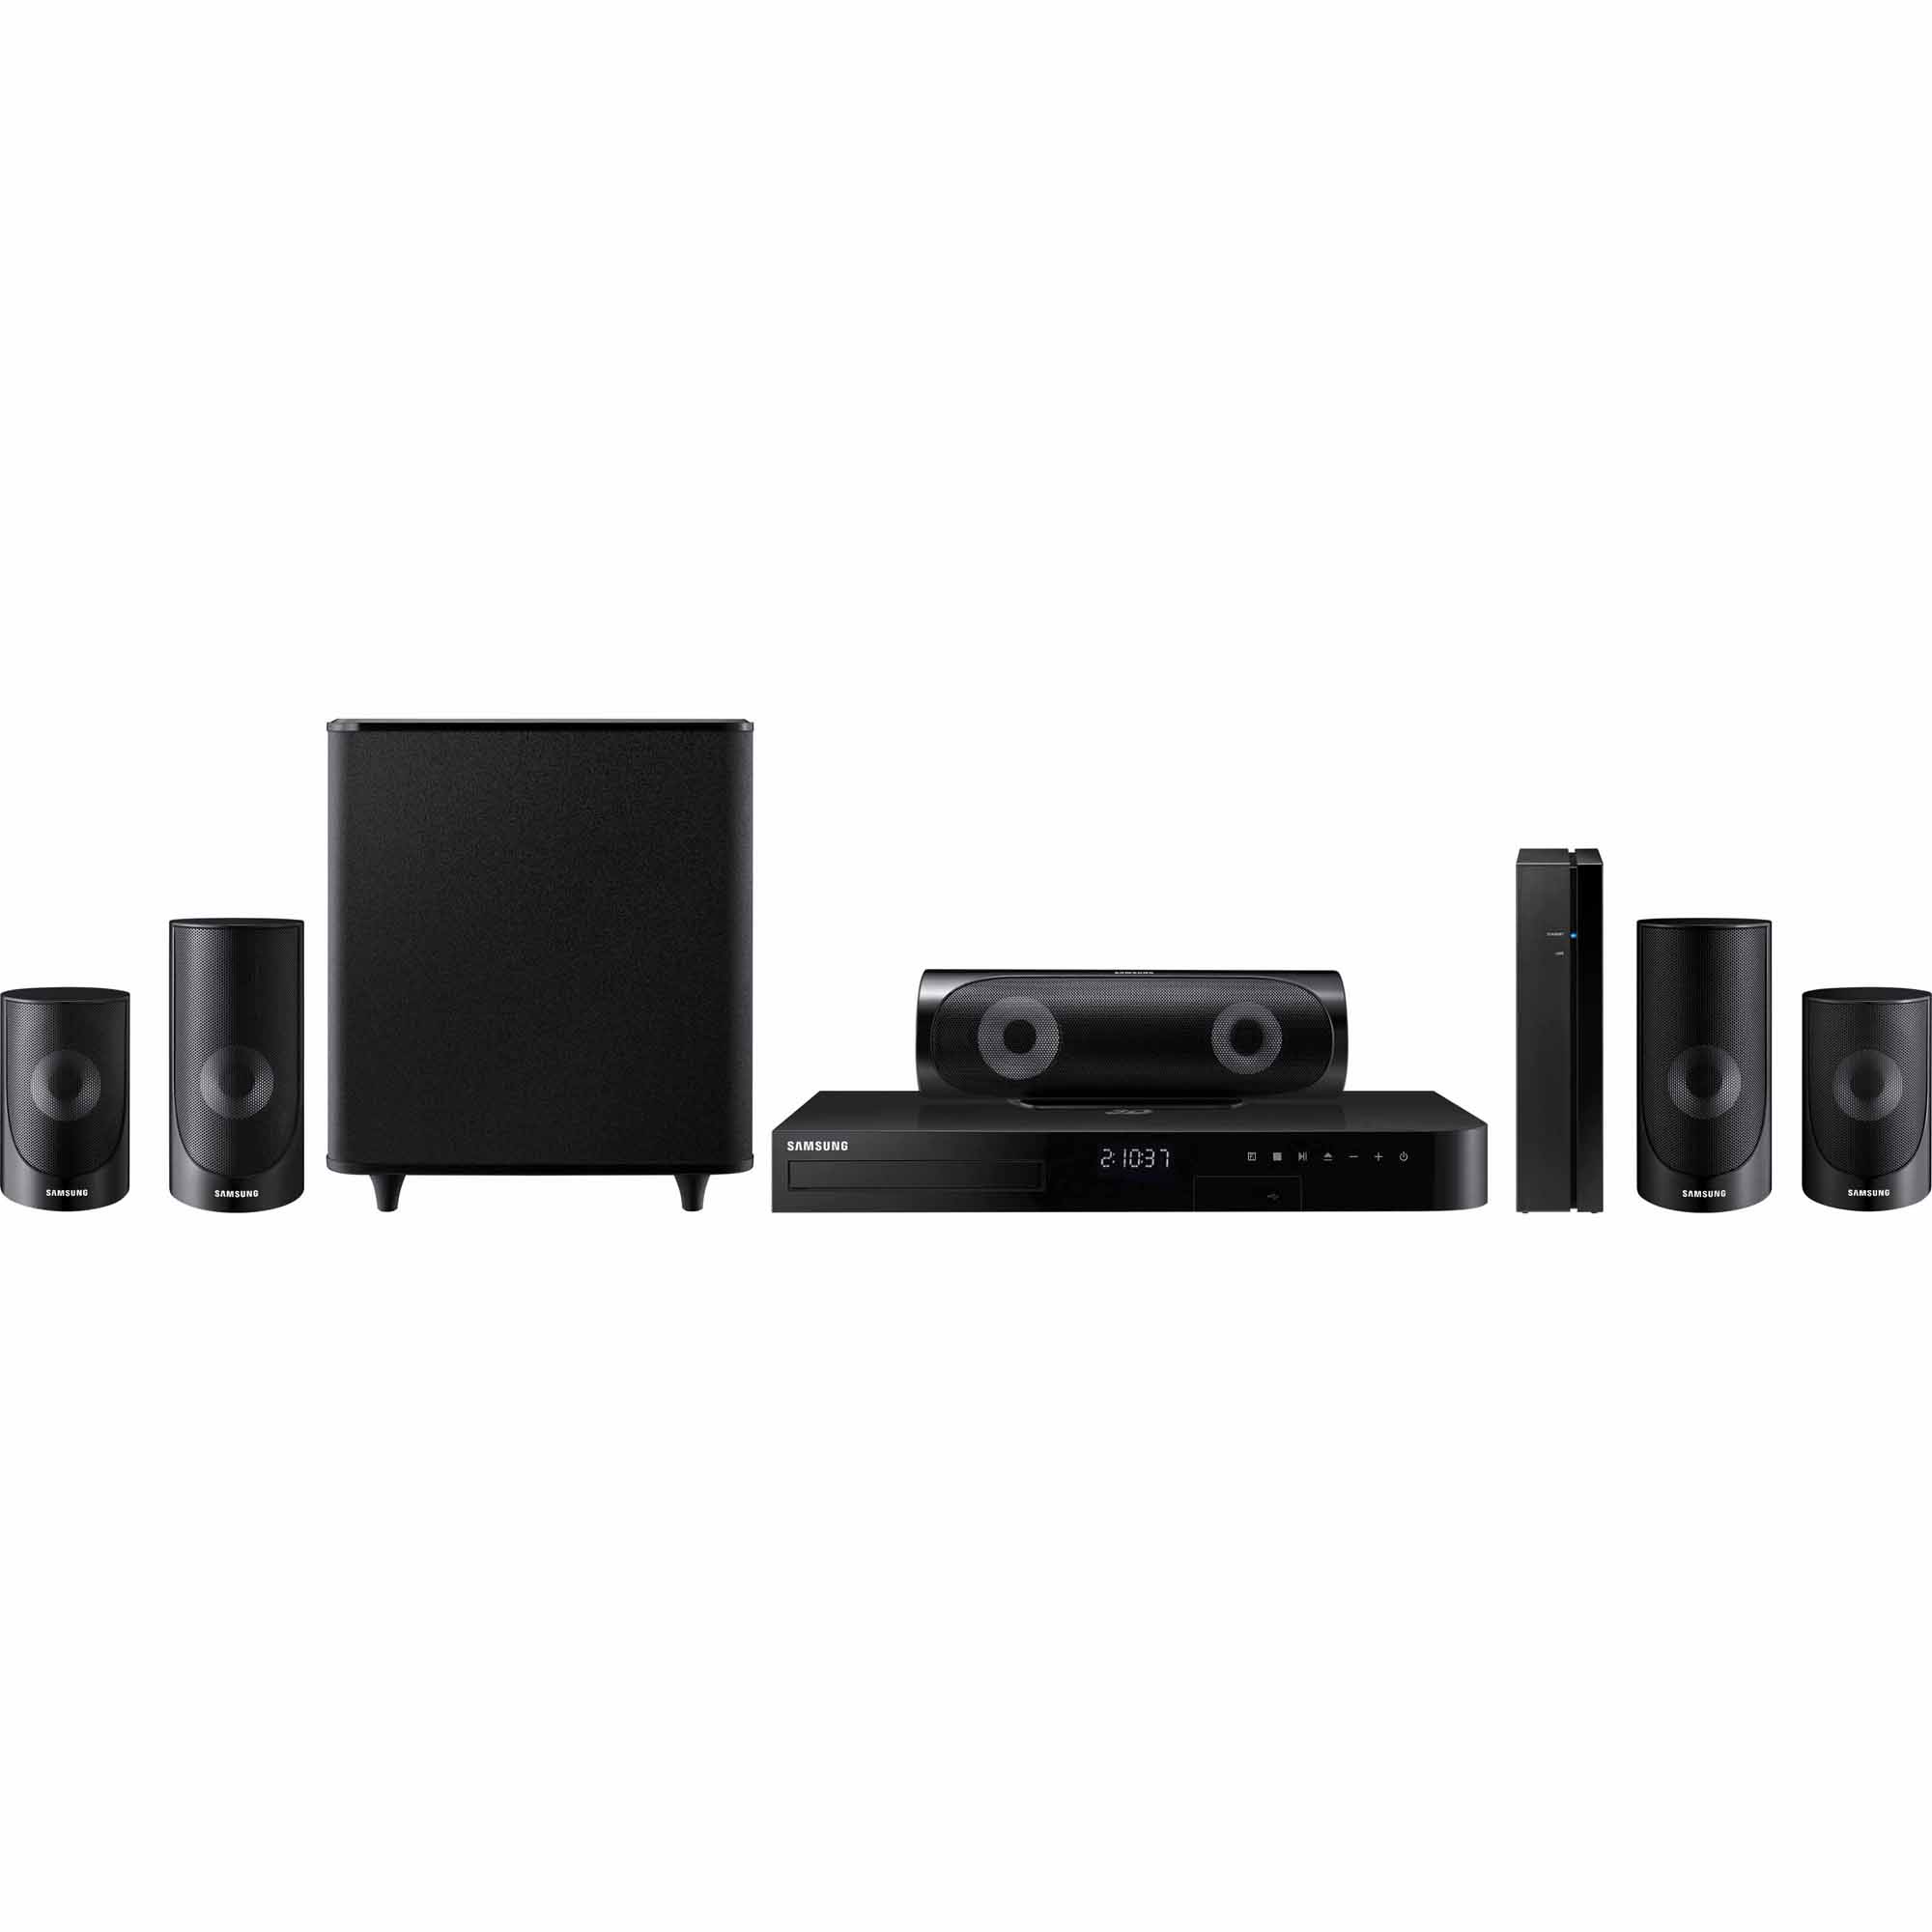 Samsung HT-J5500W 5.1 Channel Home Theater System w/ Bluetooth and Smart Blu-ray Player